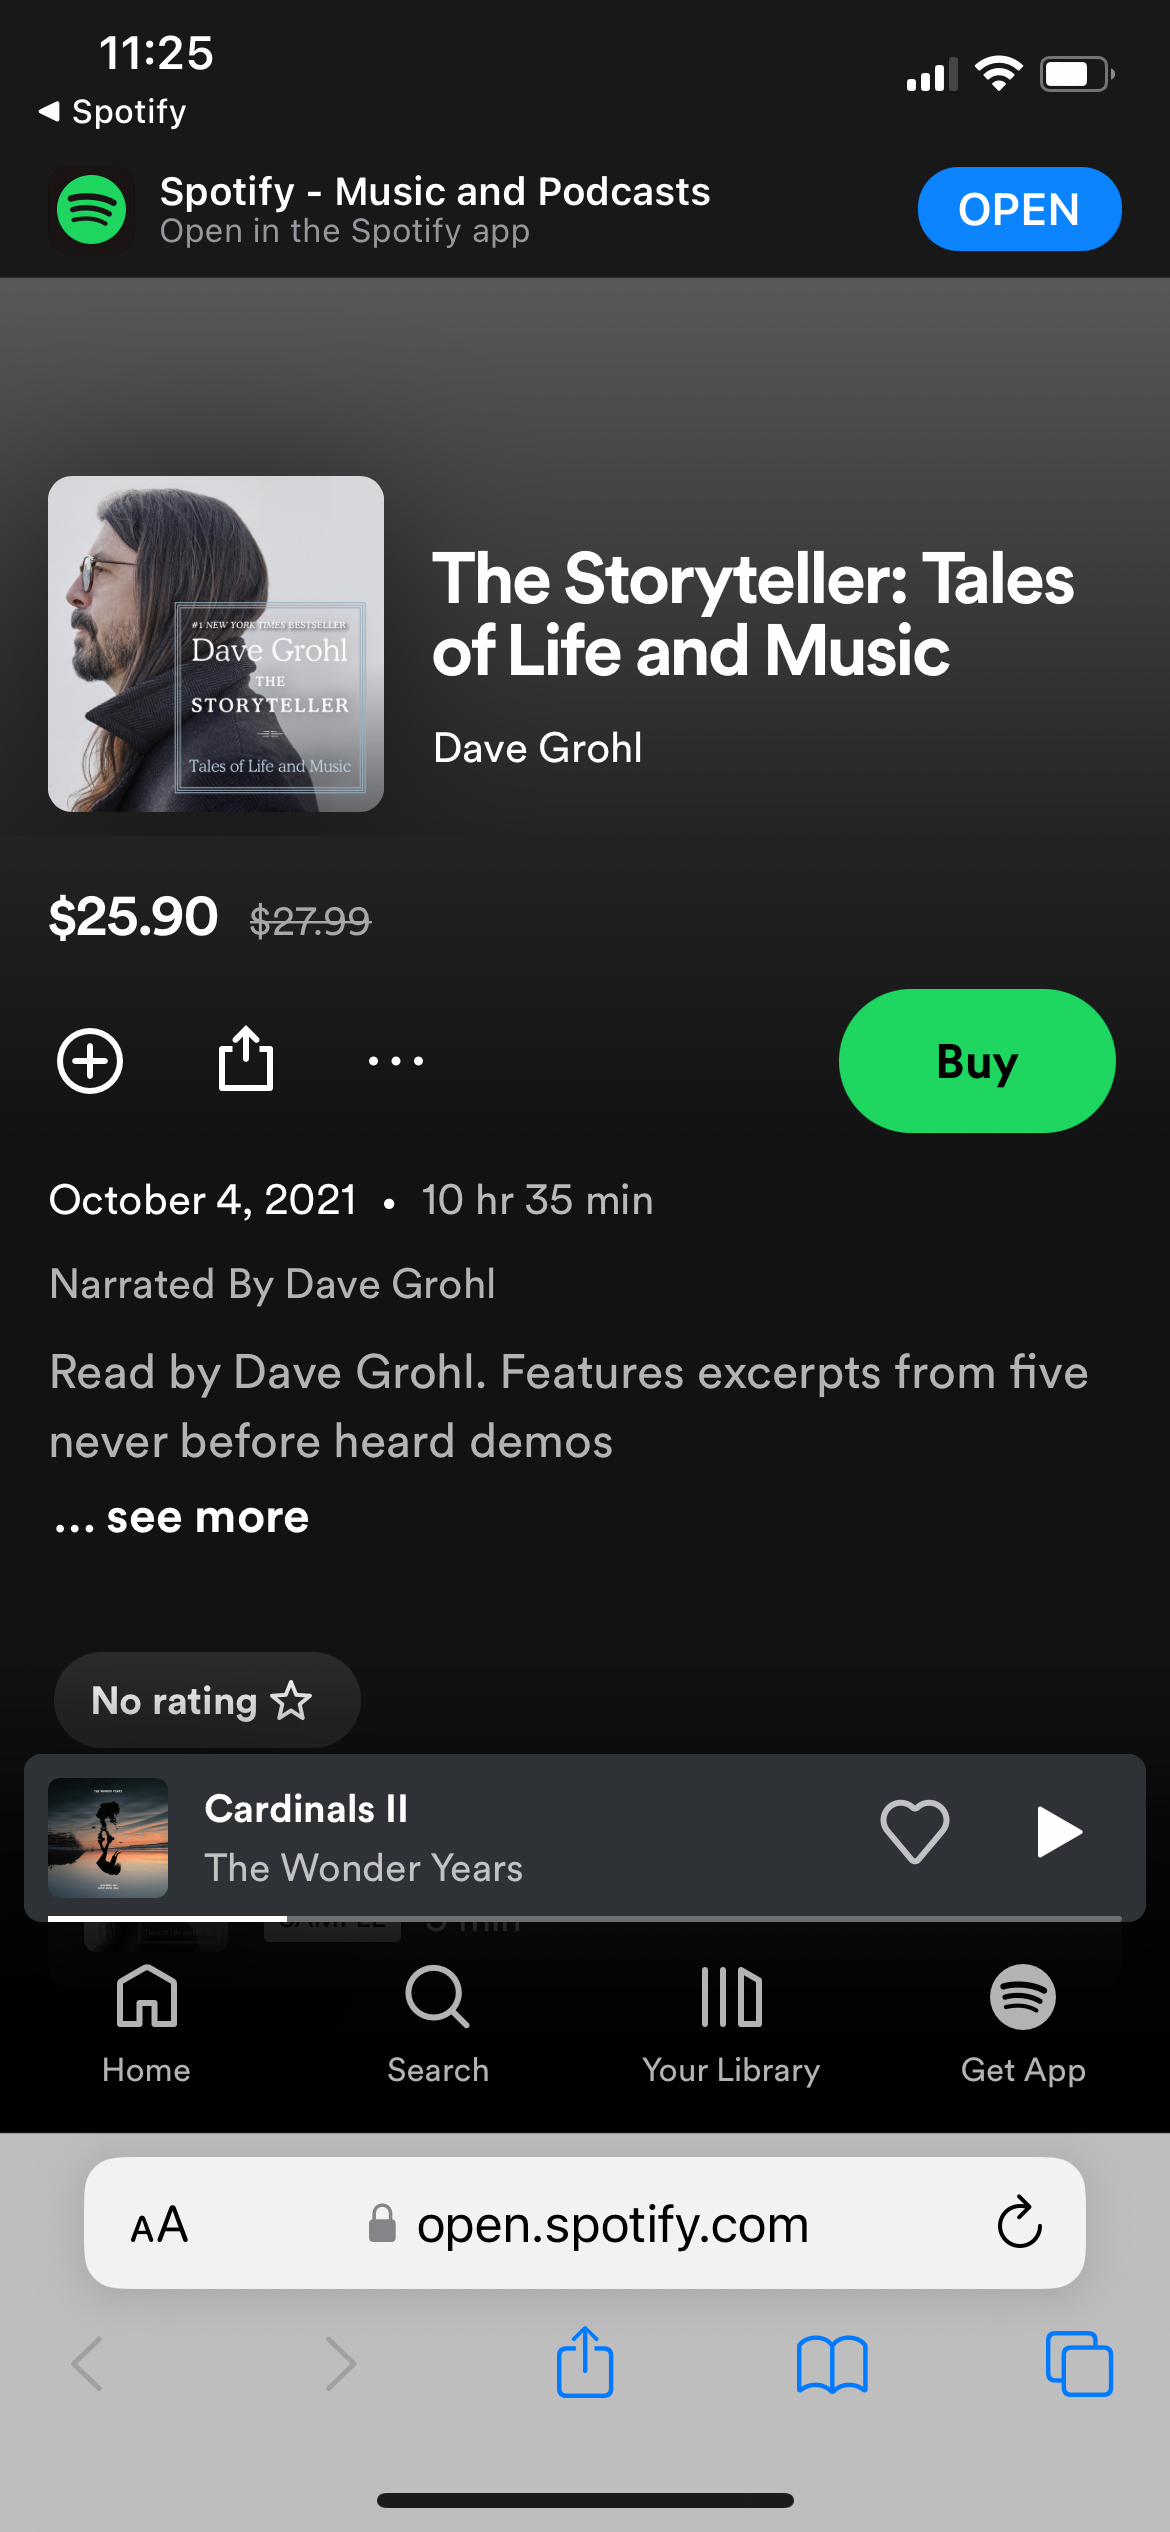 does spotify cost anything